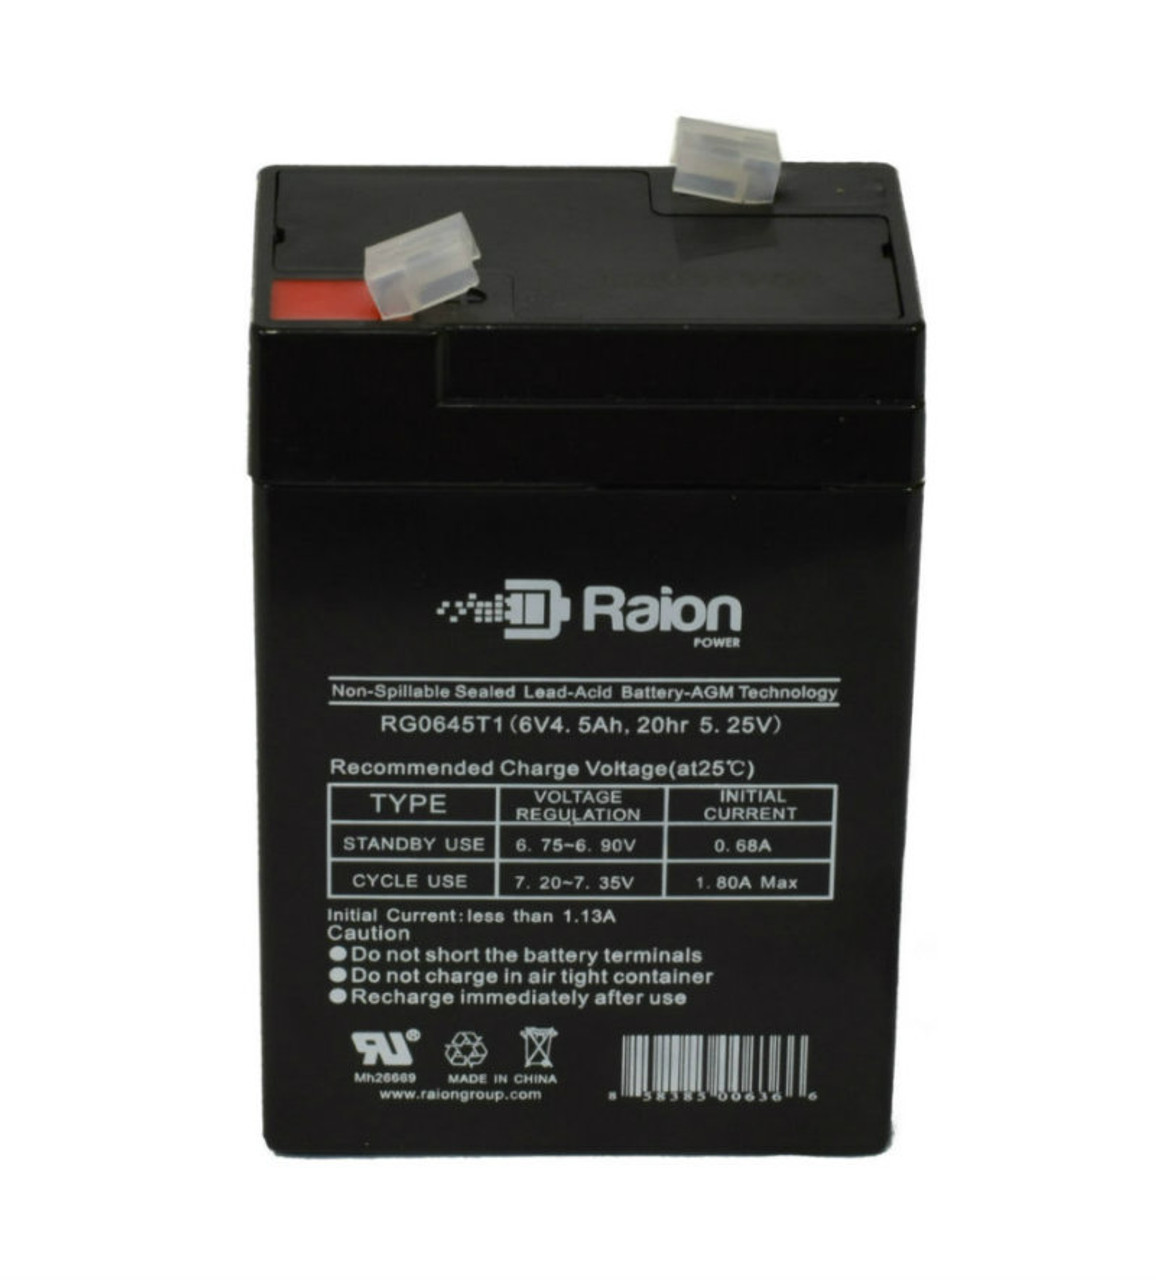 Raion Power RG0645T1 Replacement Battery Cartridge for FirstPower FP650HR